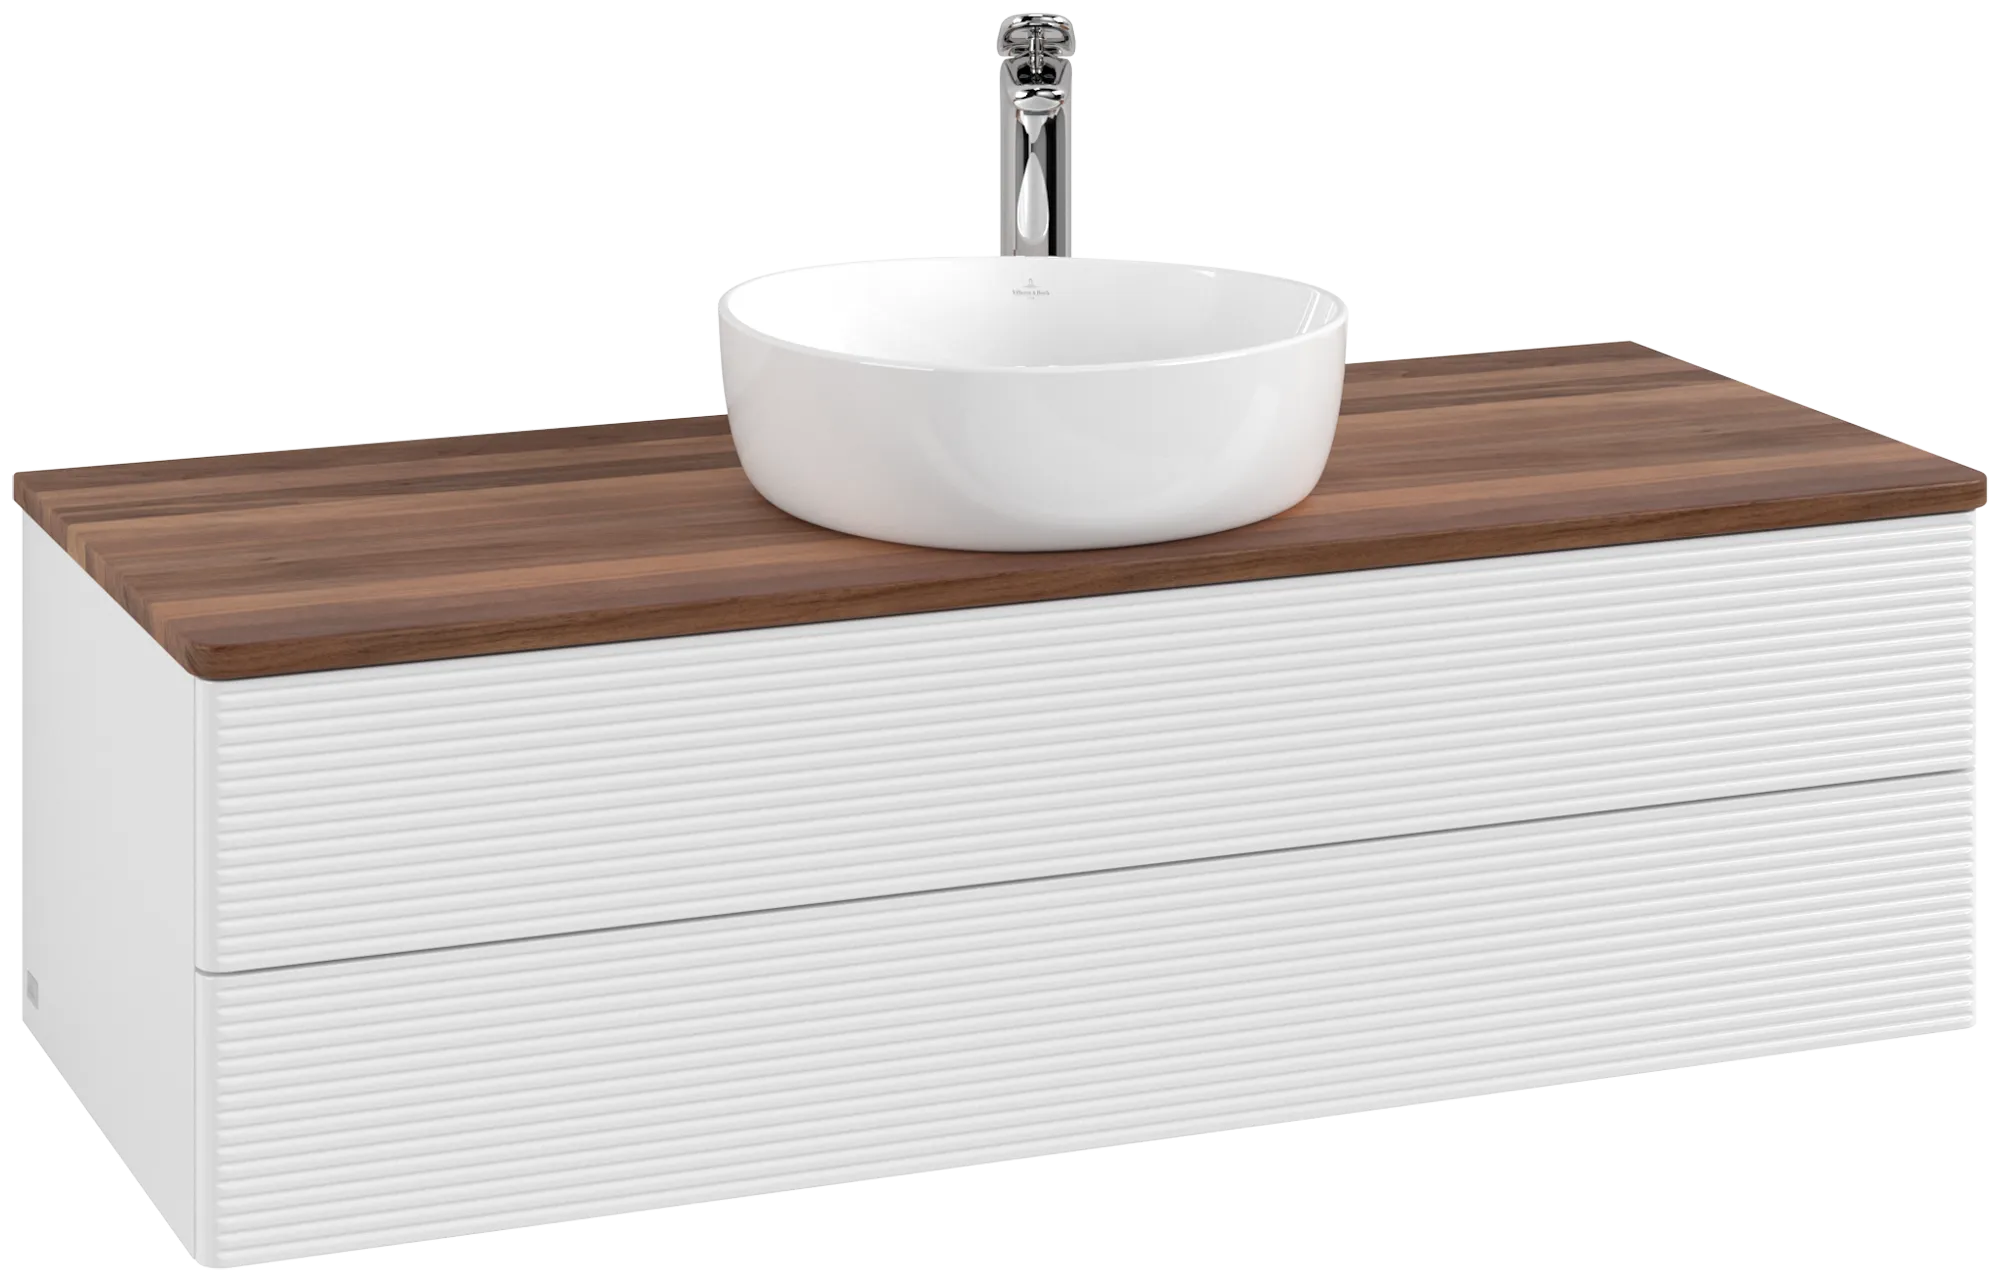 Picture of VILLEROY BOCH Antao Vanity unit, 2 pull-out compartments, 1200 x 360 x 500 mm, Front with grain texture, Glossy White Lacquer / Warm Walnut #K21152GF